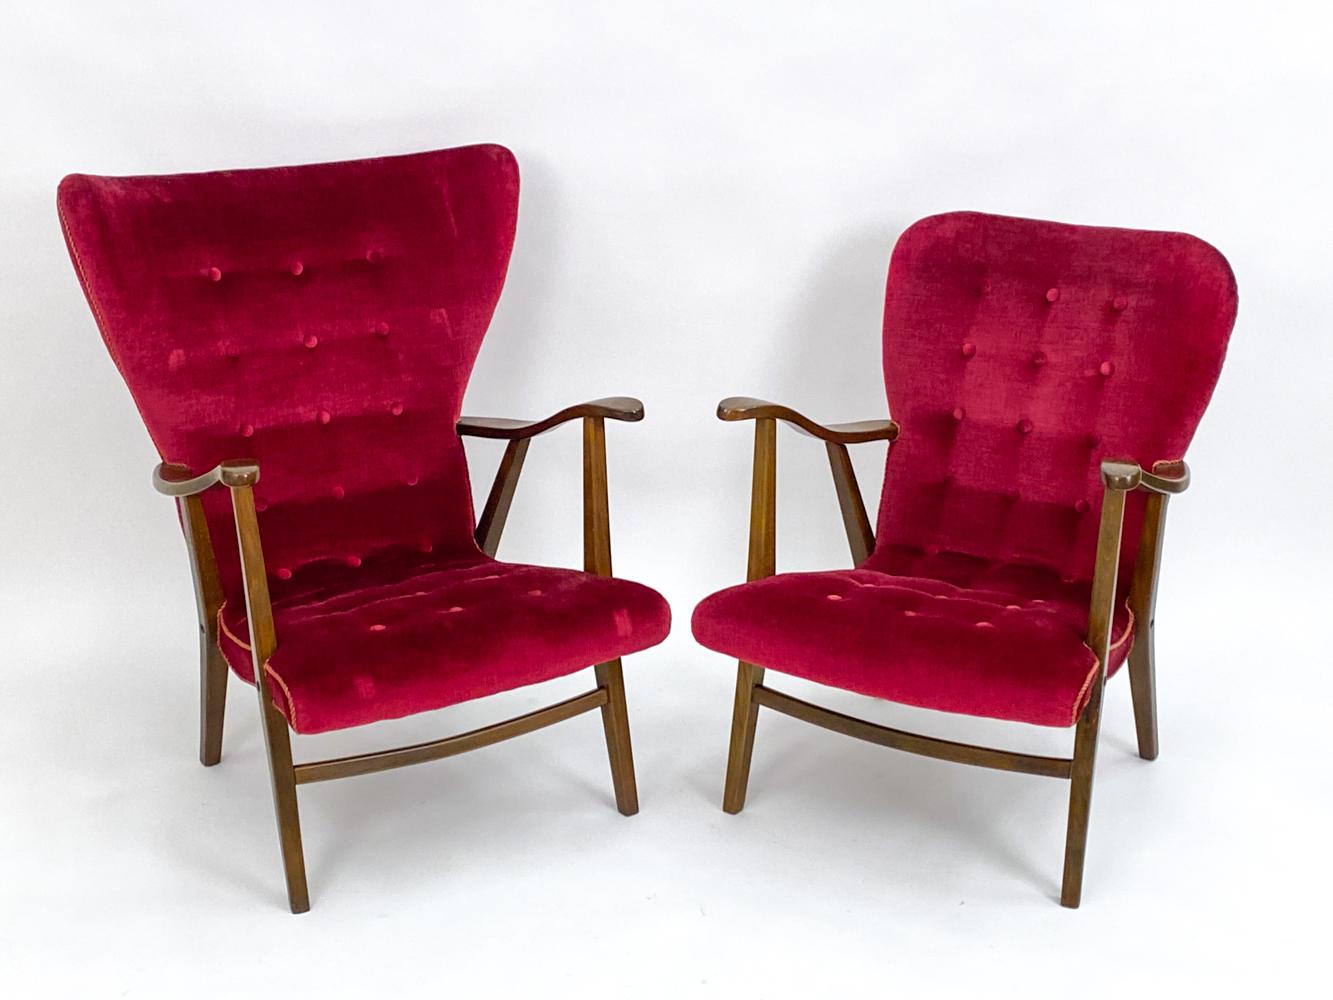 Transport yourself to the golden era of Swedish design with this exceptional pair of wingback 